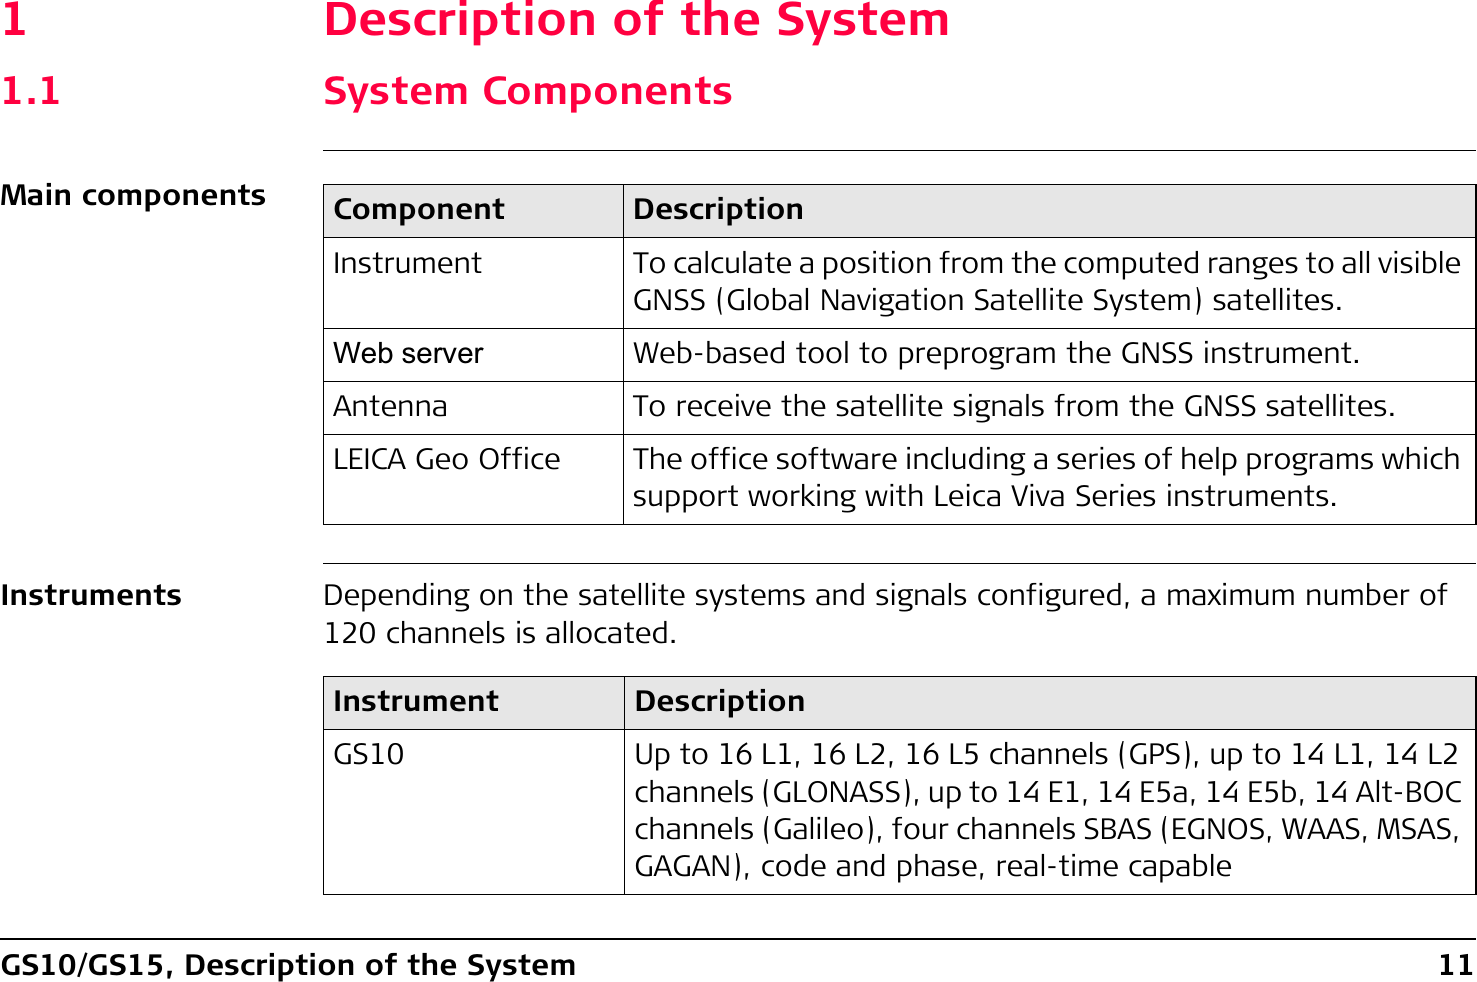 GS10/GS15, Description of the System 111 Description of the System1.1 System ComponentsMain componentsInstruments Depending on the satellite systems and signals configured, a maximum number of 120 channels is allocated.Component DescriptionInstrument To calculate a position from the computed ranges to all visible GNSS (Global Navigation Satellite System) satellites.Web server Web-based tool to preprogram the GNSS instrument.Antenna To receive the satellite signals from the GNSS satellites.LEICA Geo Office The office software including a series of help programs which support working with Leica Viva Series instruments.Instrument DescriptionGS10 Up to 16 L1, 16 L2, 16 L5 channels (GPS), up to 14 L1, 14 L2 channels (GLONASS), up to 14 E1, 14 E5a, 14 E5b, 14 Alt-BOC channels (Galileo), four channels SBAS (EGNOS, WAAS, MSAS, GAGAN), code and phase, real-time capable